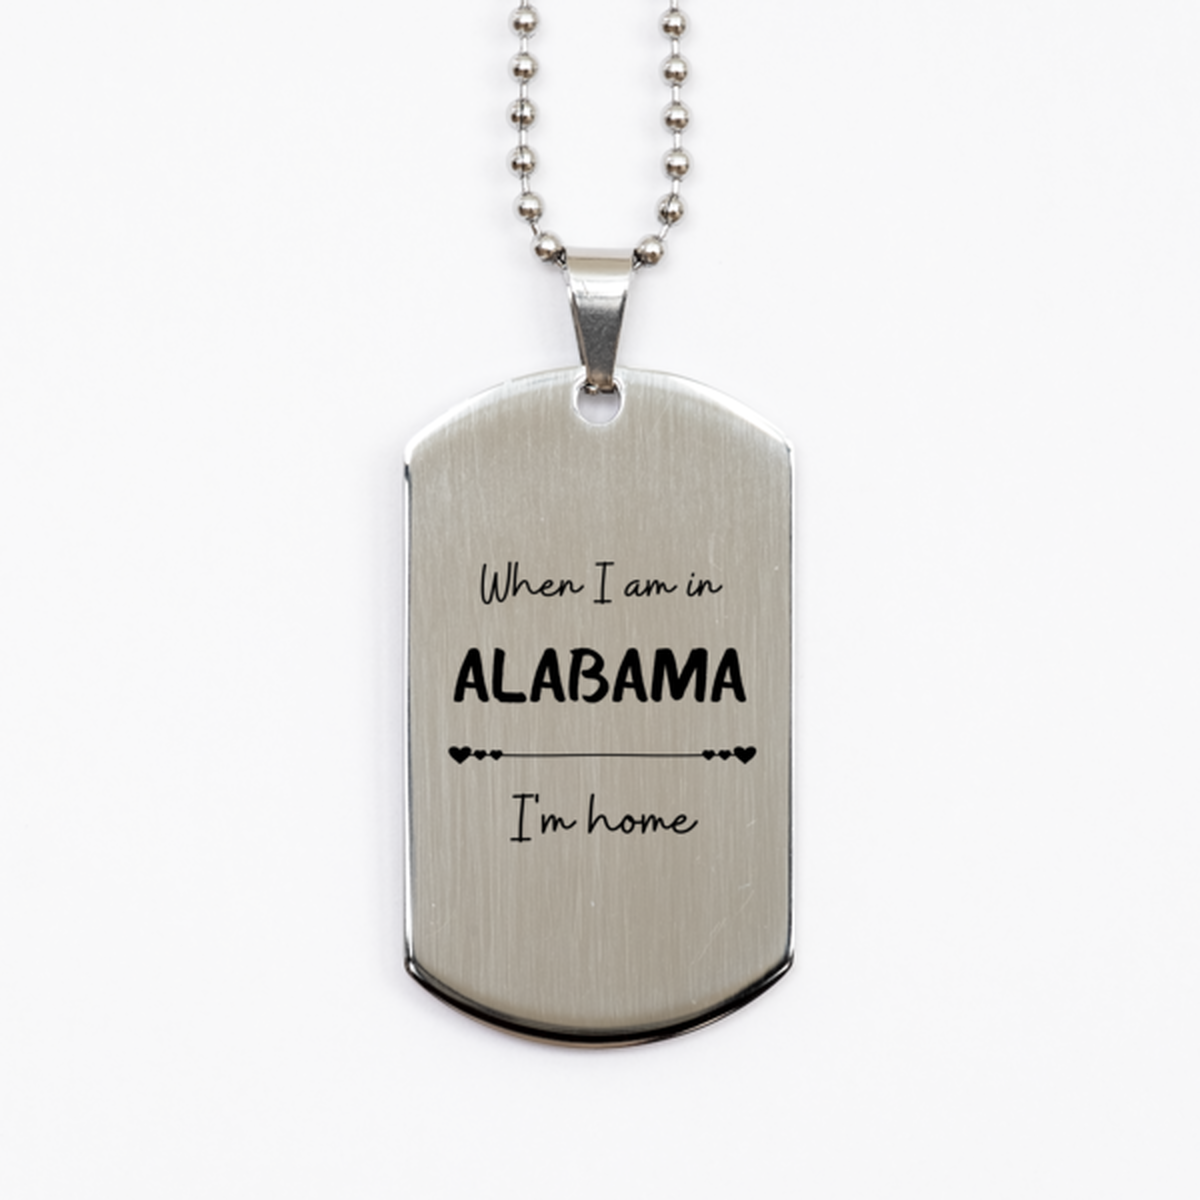 When I am in Alabama I'm home Silver Dog Tag, Cheap Gifts For Alabama, State Alabama Birthday Gifts for Friends Coworker